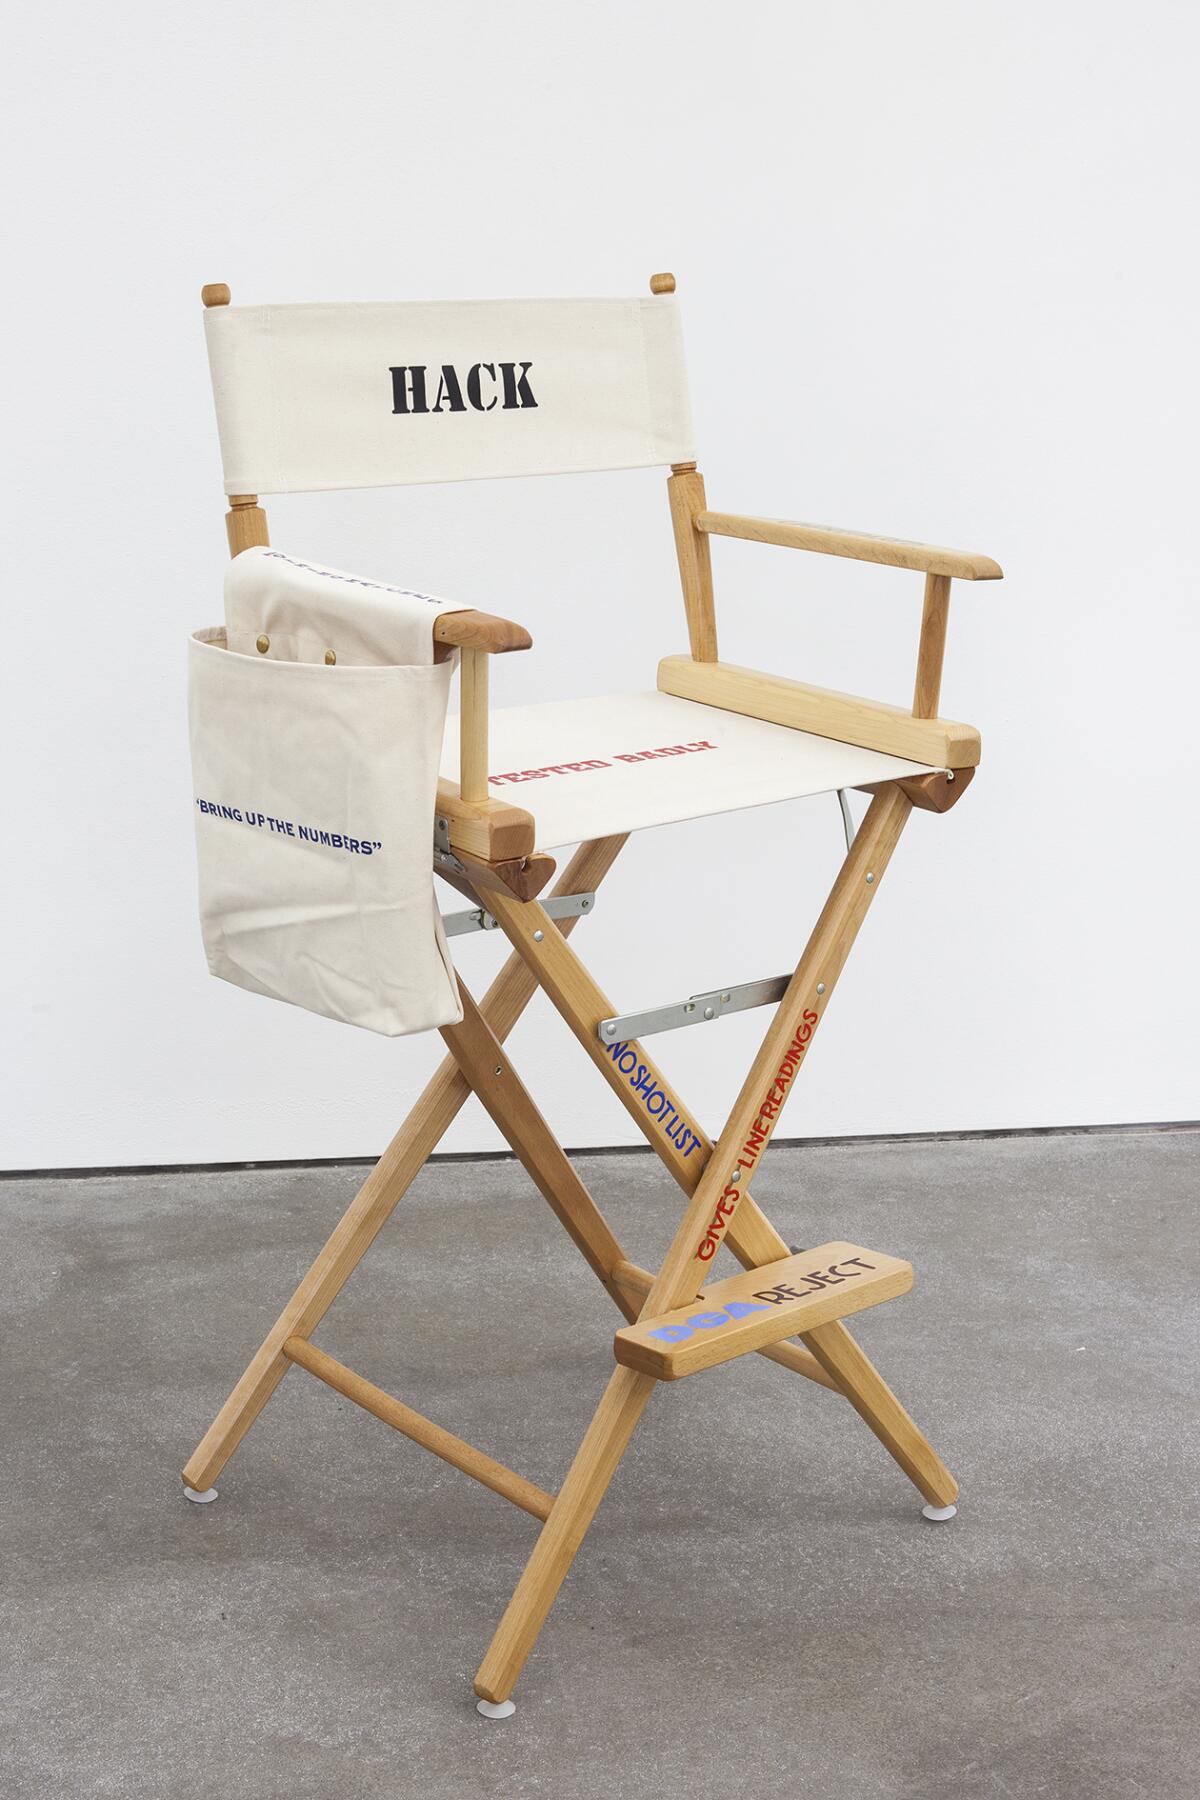 A director's chair with words painted on it